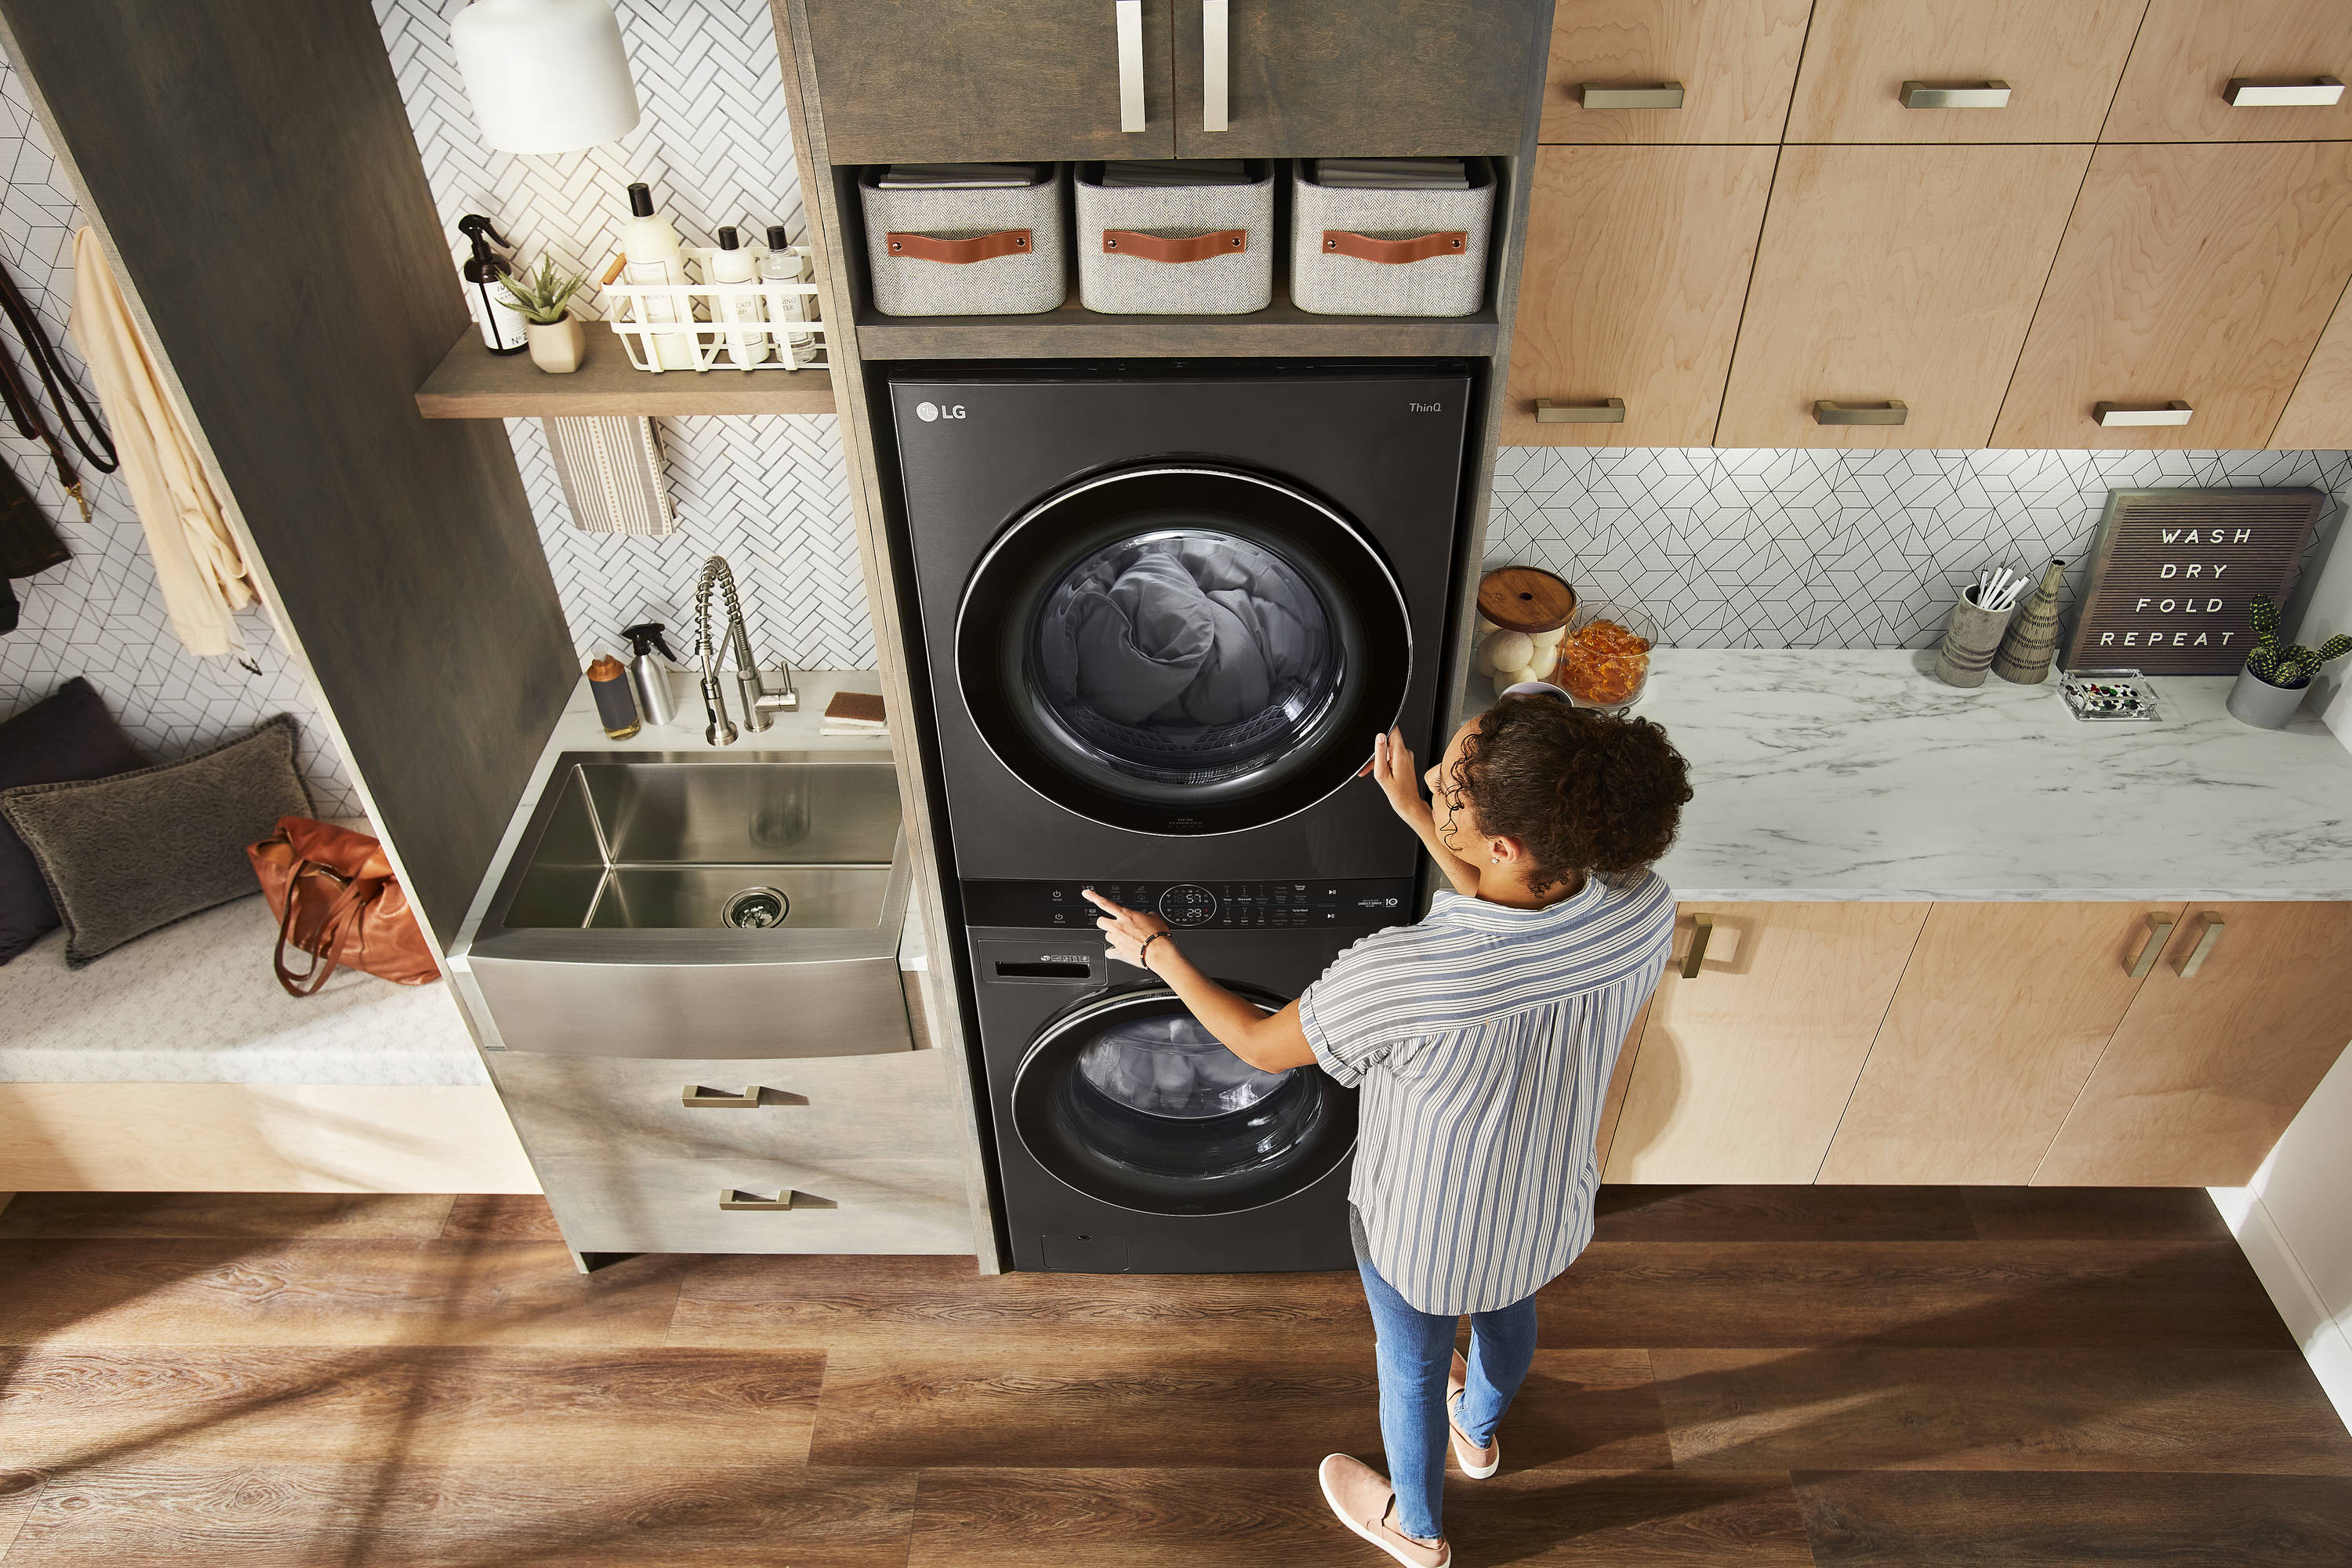 Laundry Center Electric Washer WashTower Laundry 7.4-cu at department the Dryer STAR) 4.5-cu LG and ft with Centers ft (ENERGY in Stacked Stacked